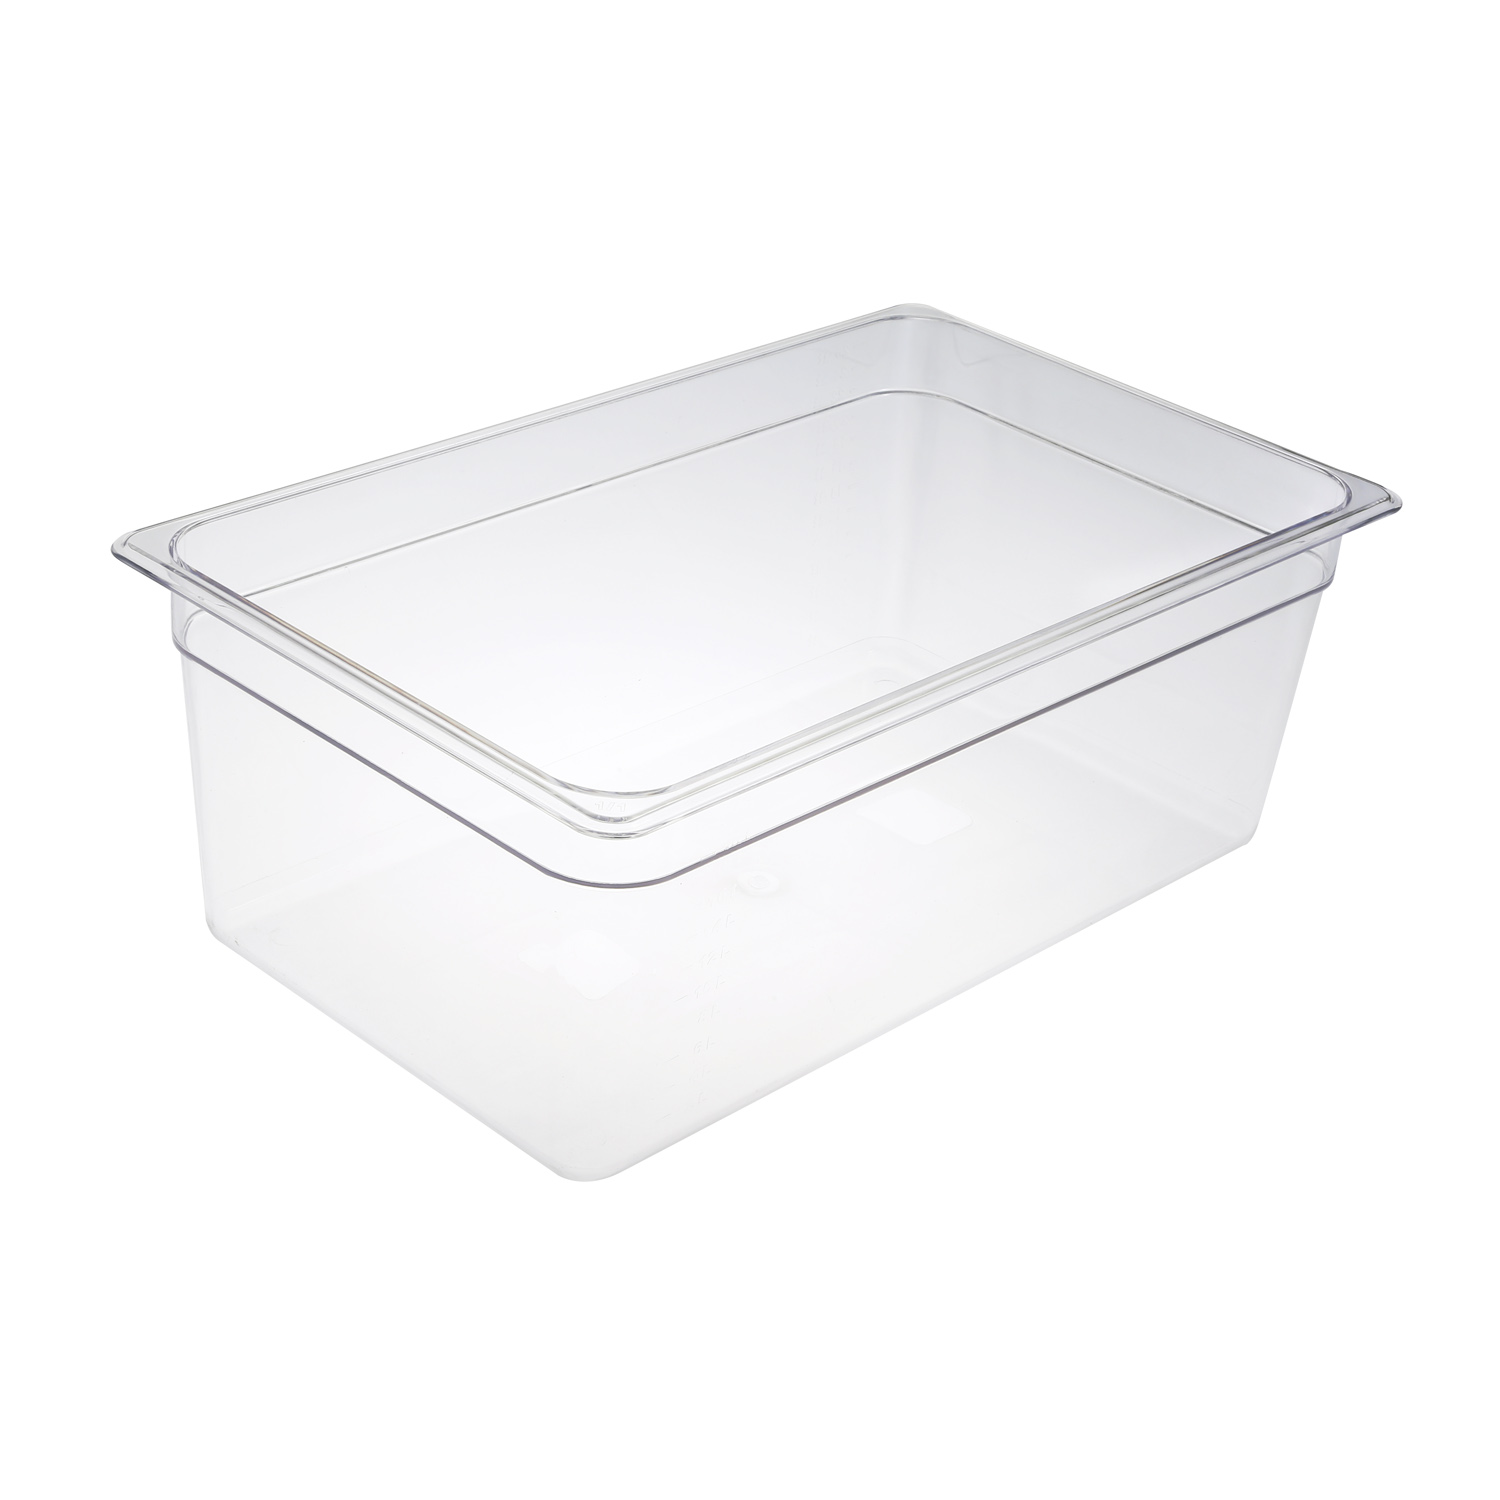 CAC China PCFP-F8 Full Size Polycarbonate Food Pan 8" Deep